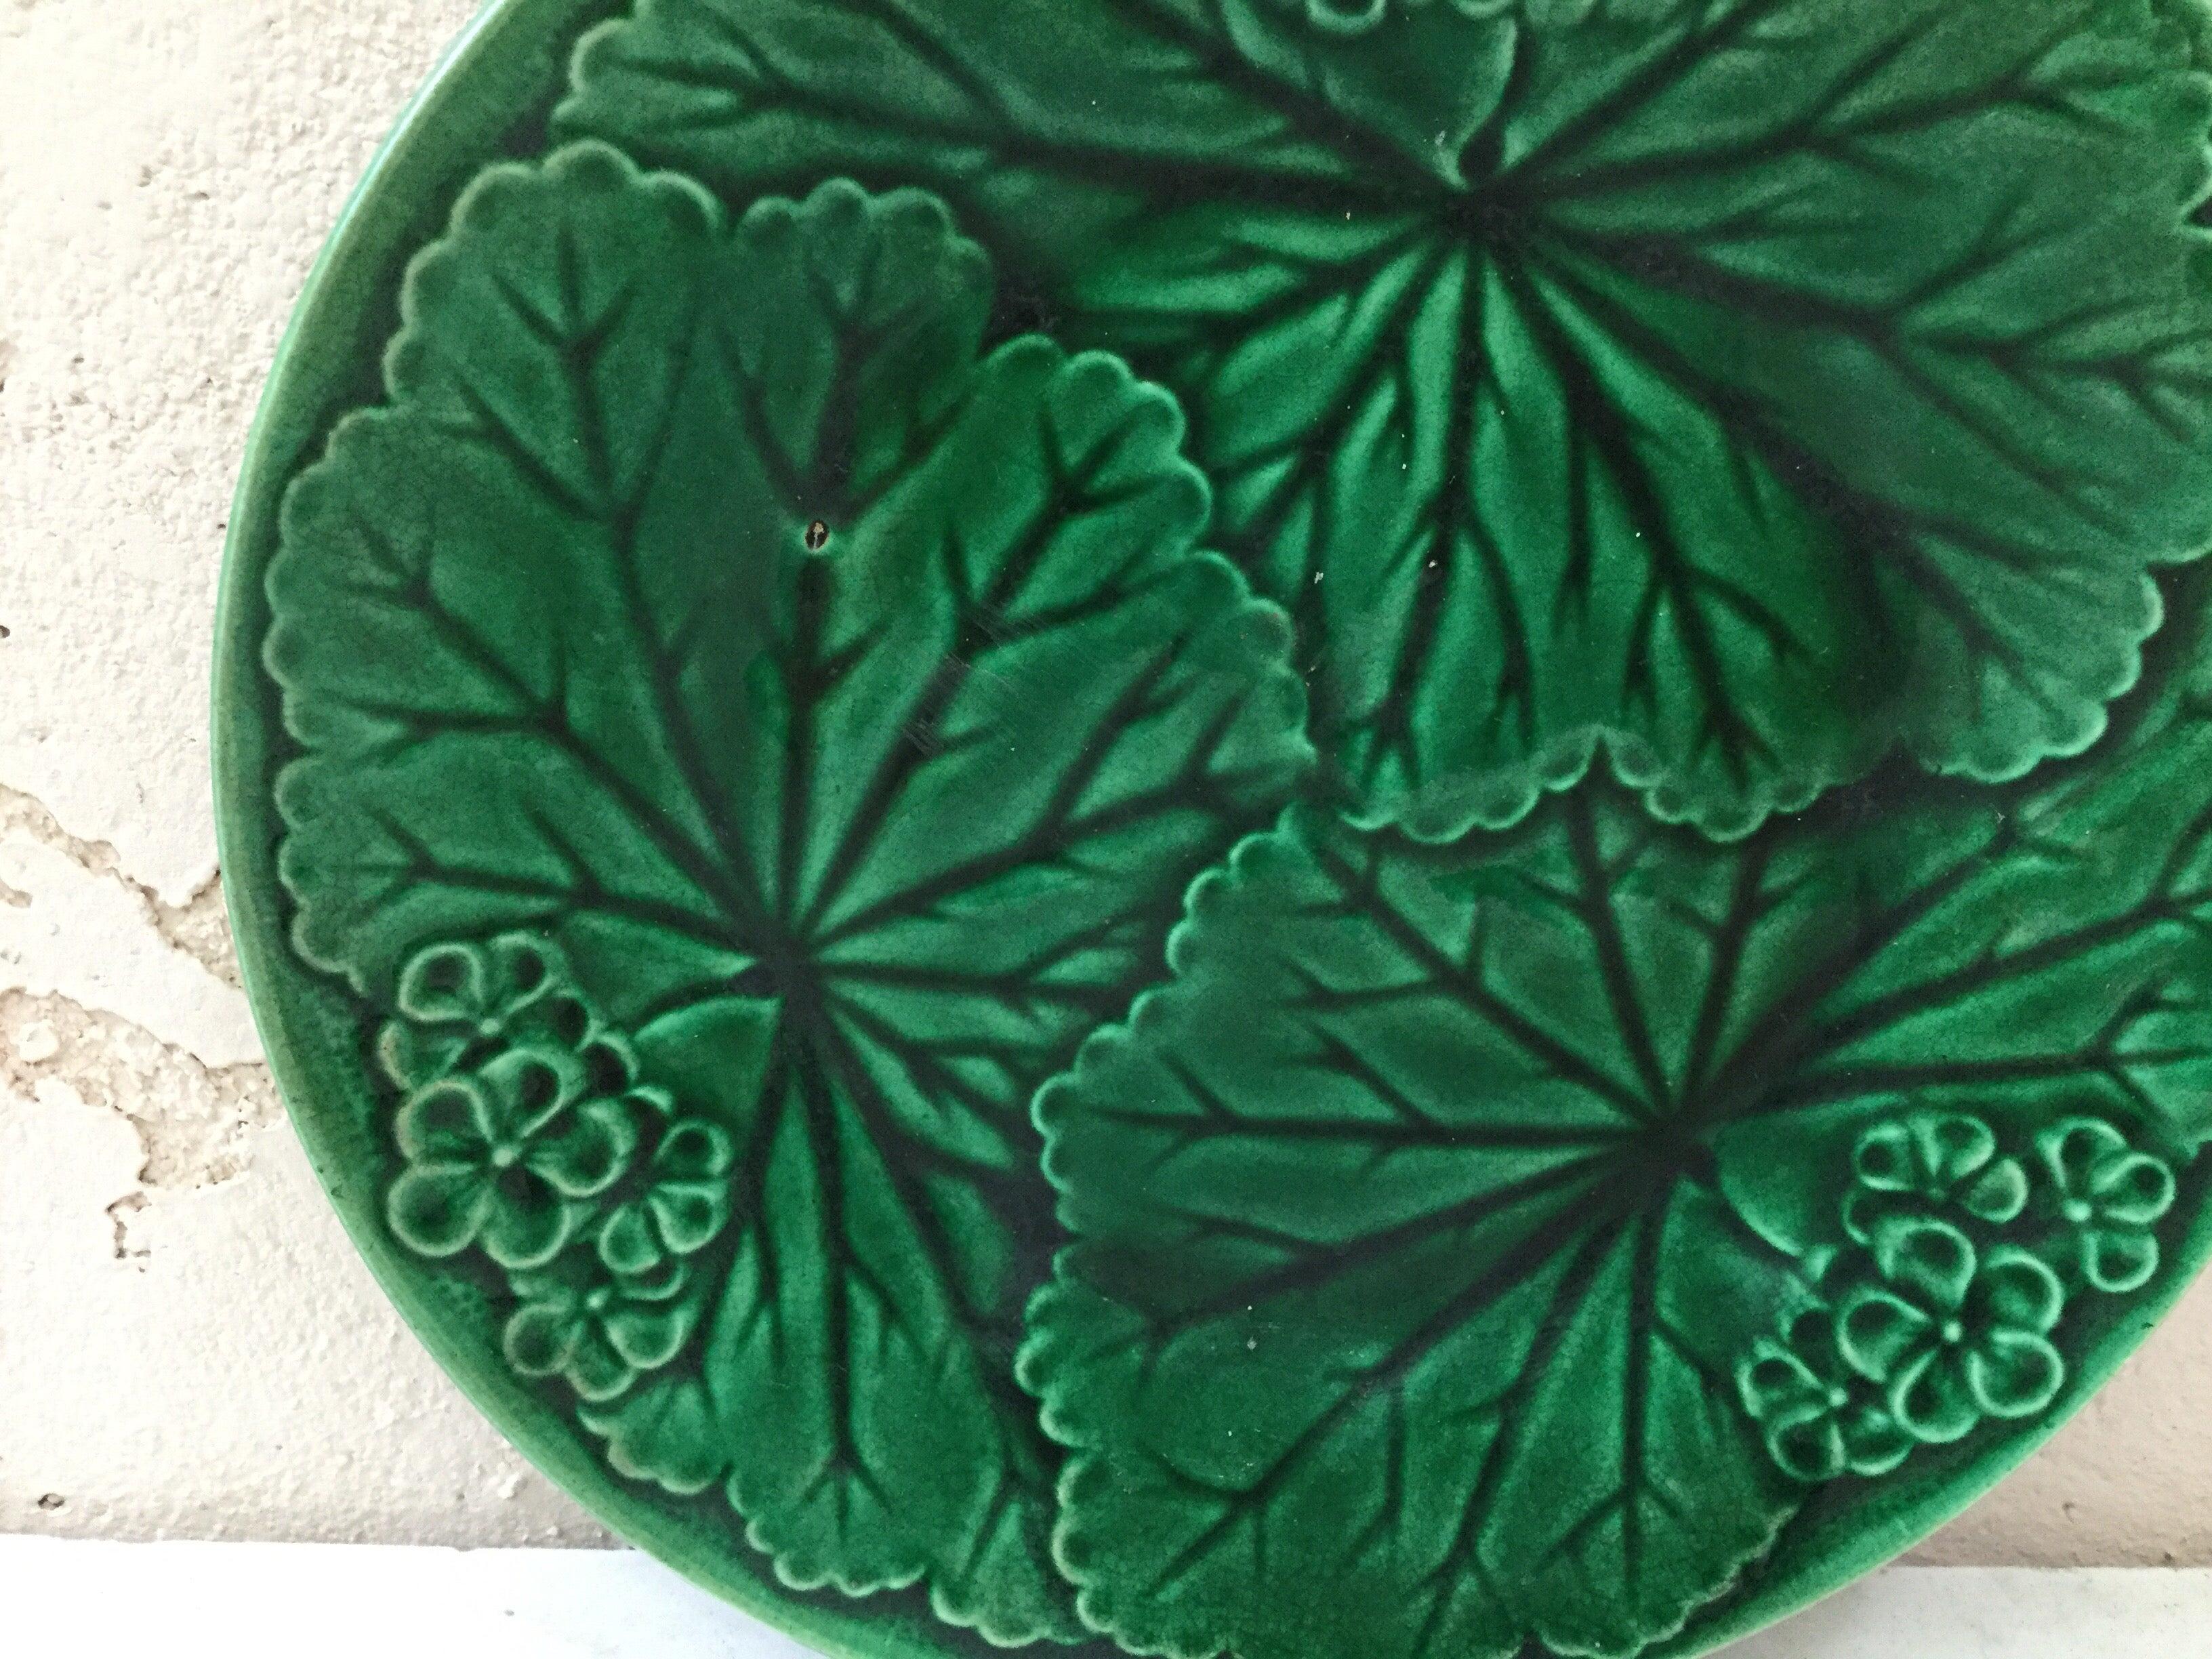 French Green Majolica Plate Clairefontaine, circa 1890